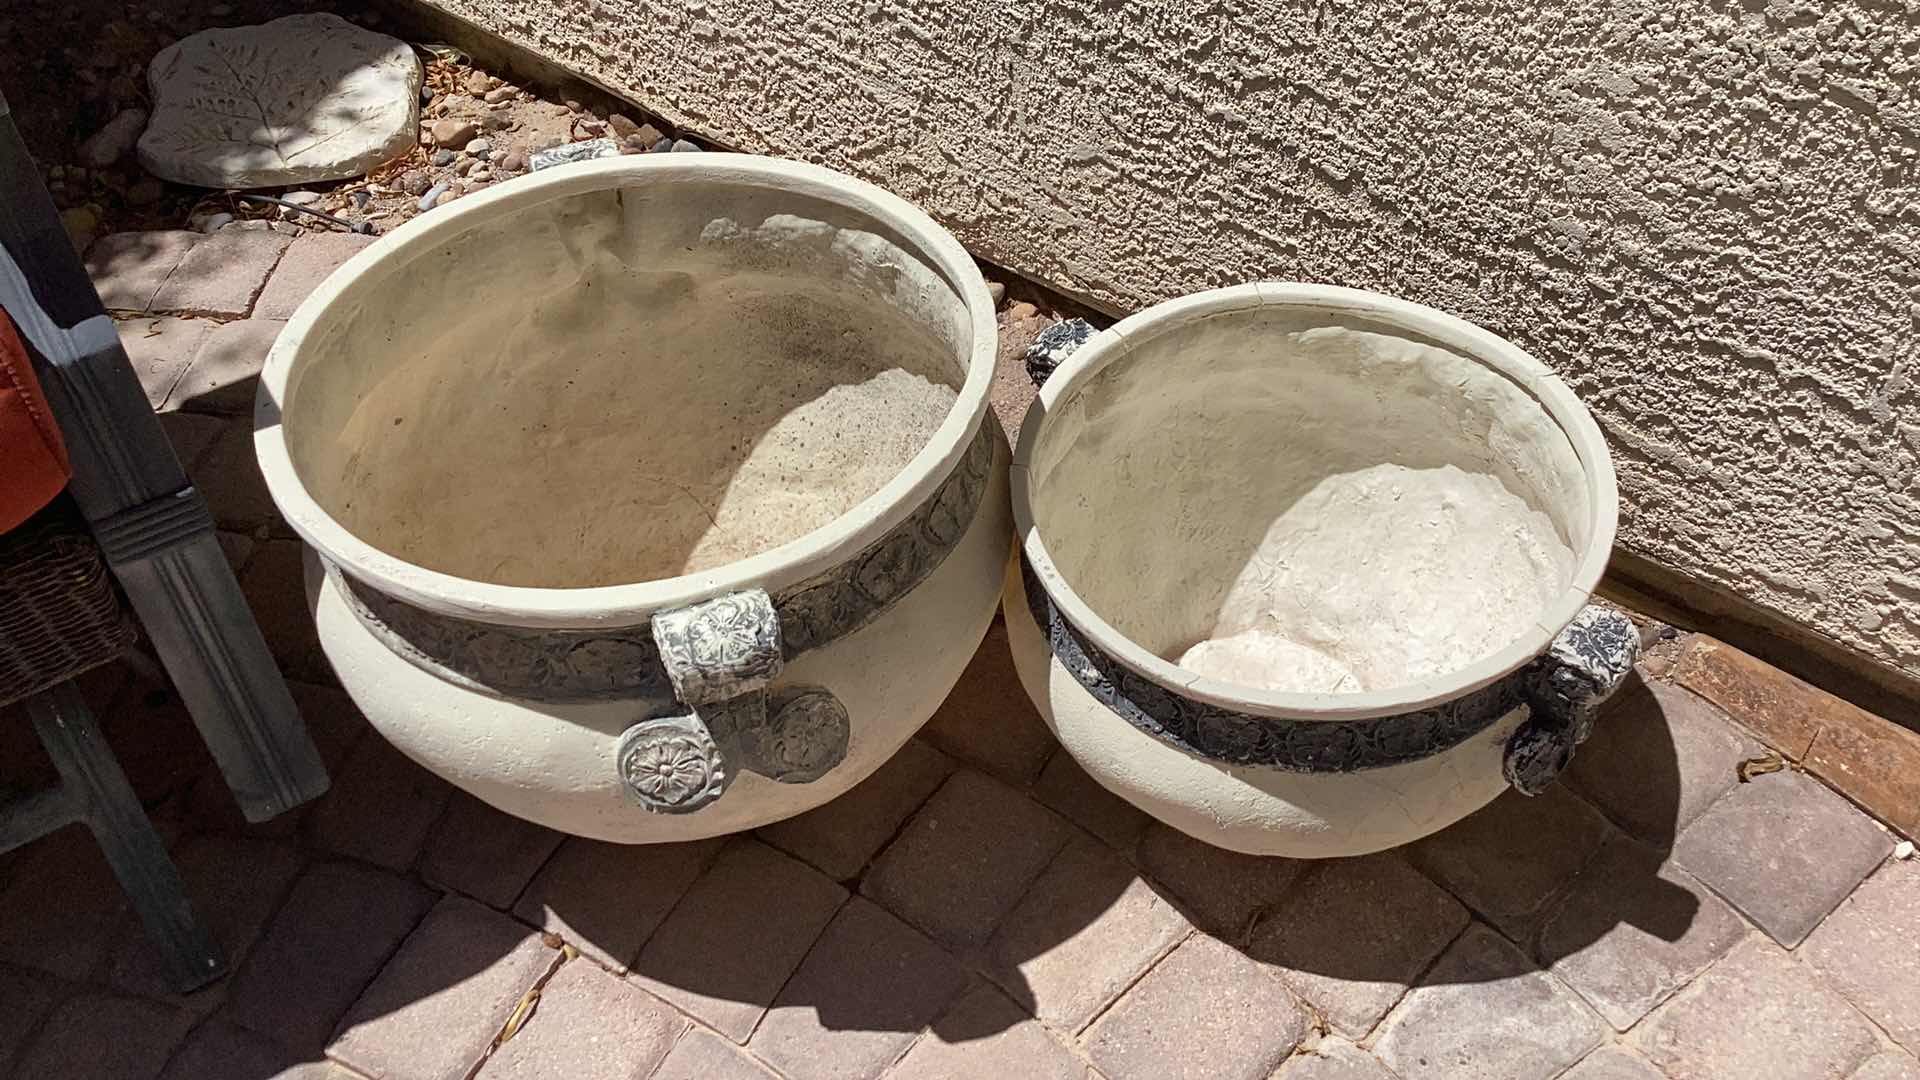 Photo 5 of FIBERGLASS PLANTERS - SET OF 2 - LARGEST IS 18 “ ACROSS OPENING